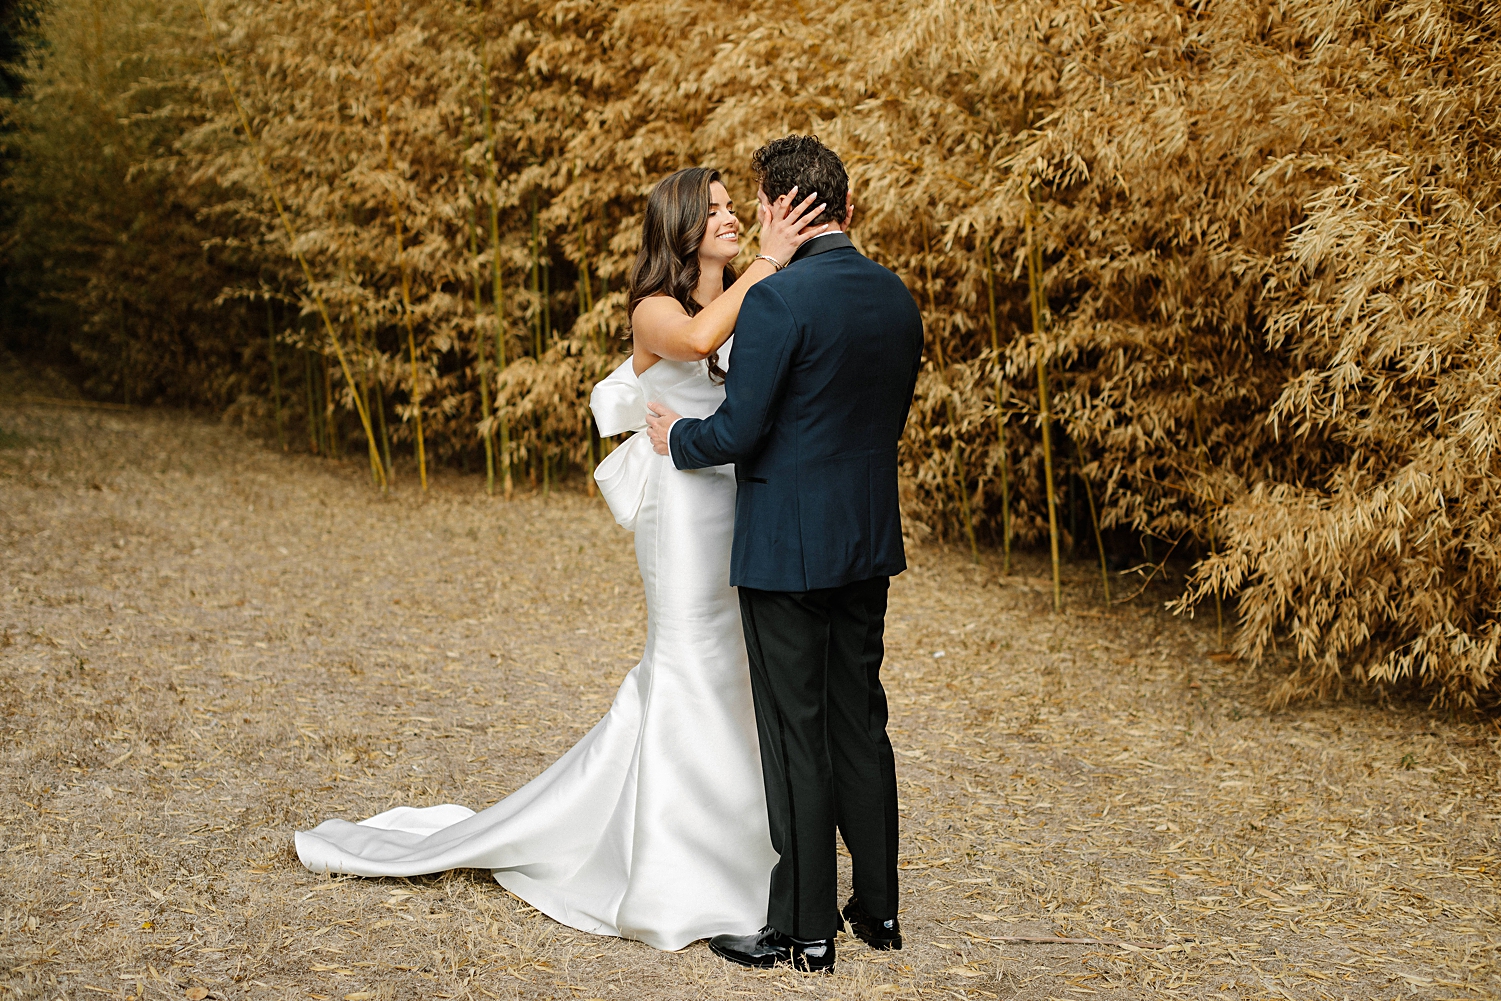 bride and groom seeing each other first time wedding look reaction in front of golden plants